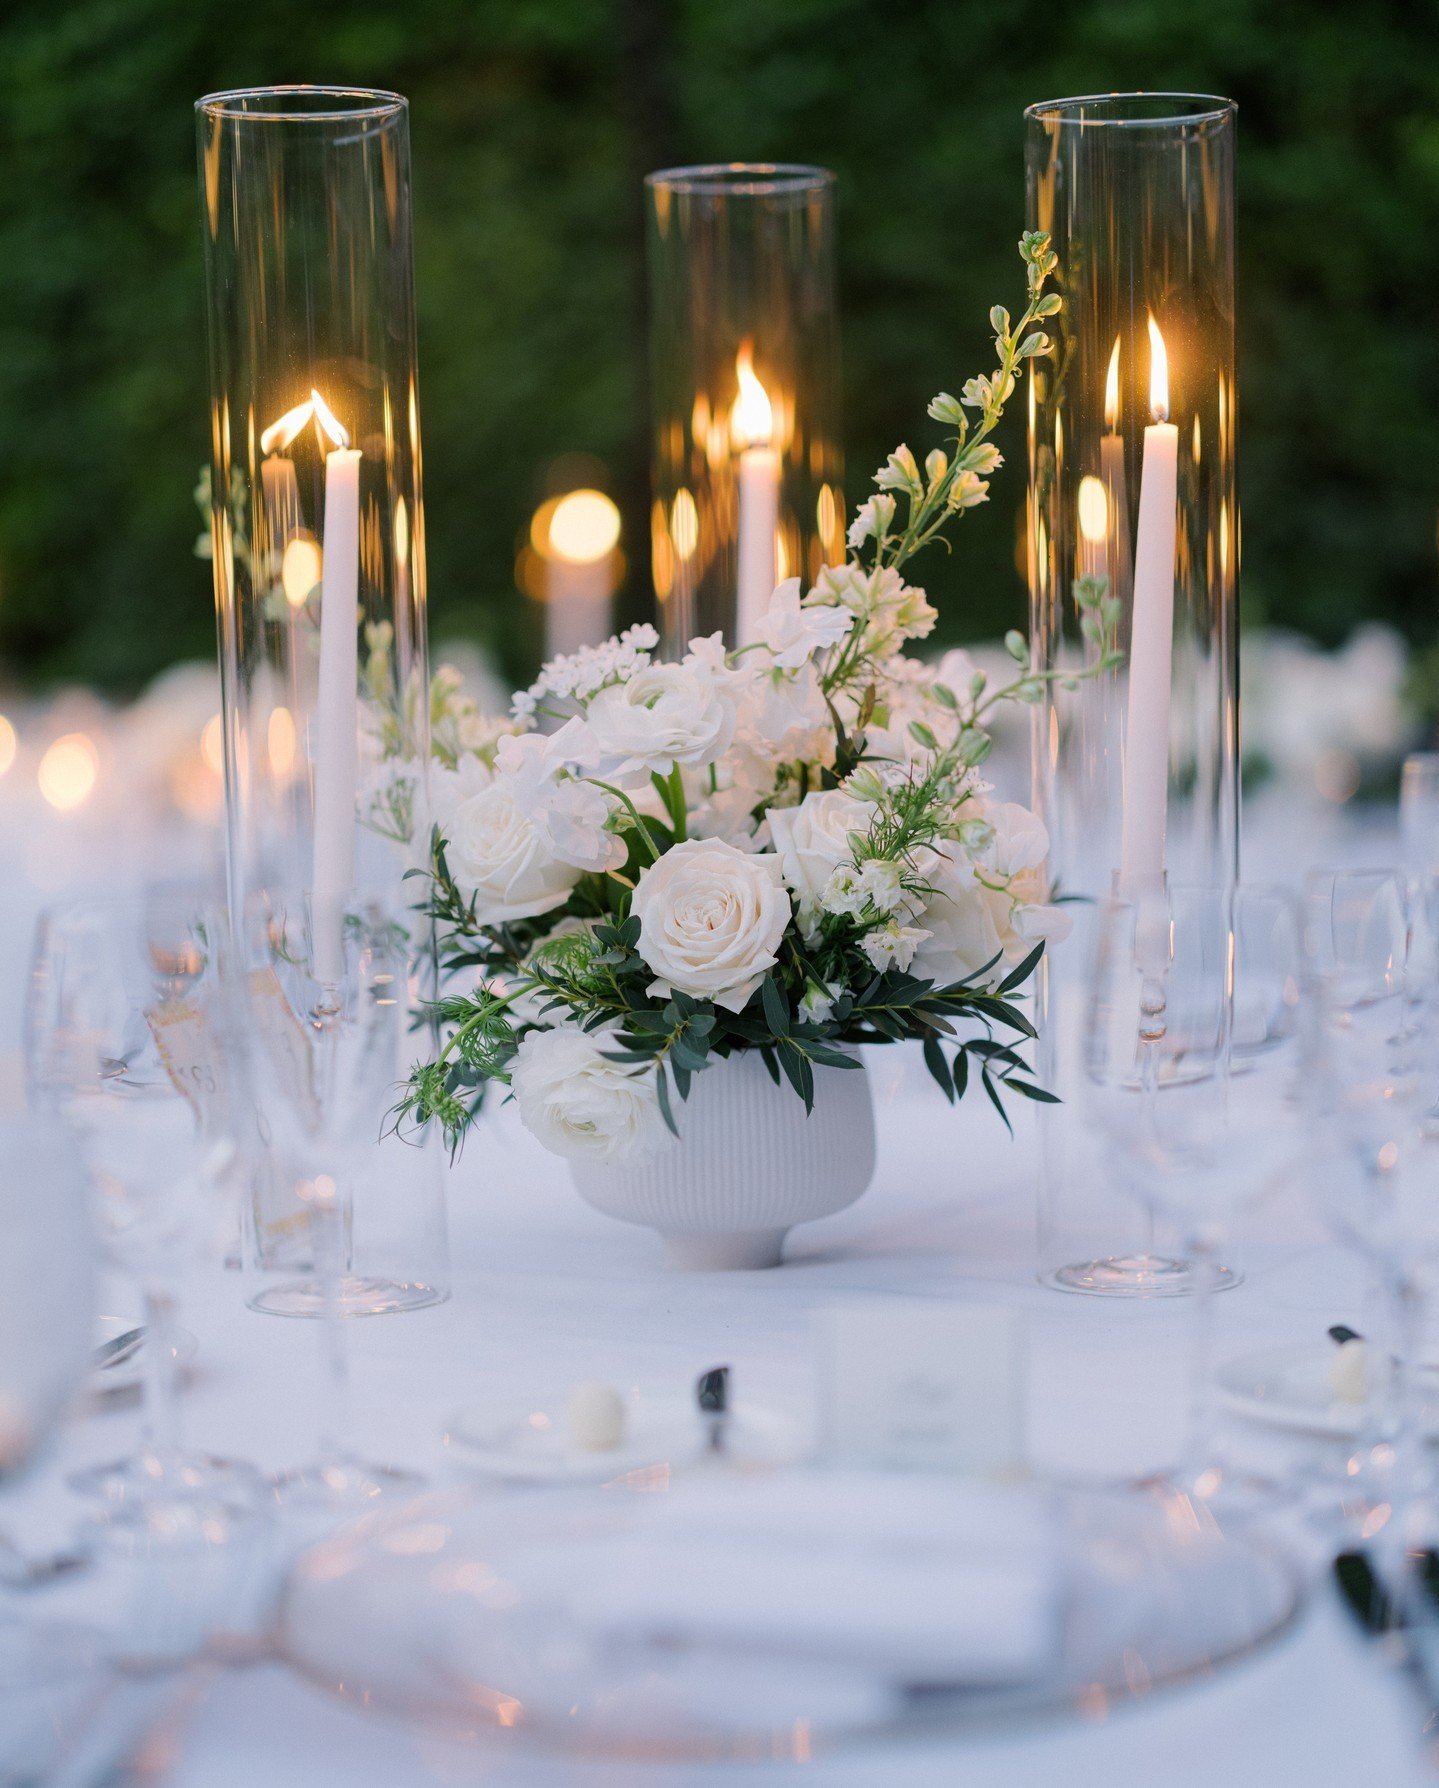 Glassware and candles are a great way to add luxe and sparkle to your wedding reception.
...
#artisaninspiration #palmspringswedding #artisanevents #artisaneventfloraldecor #weddingreception #californiaweddings